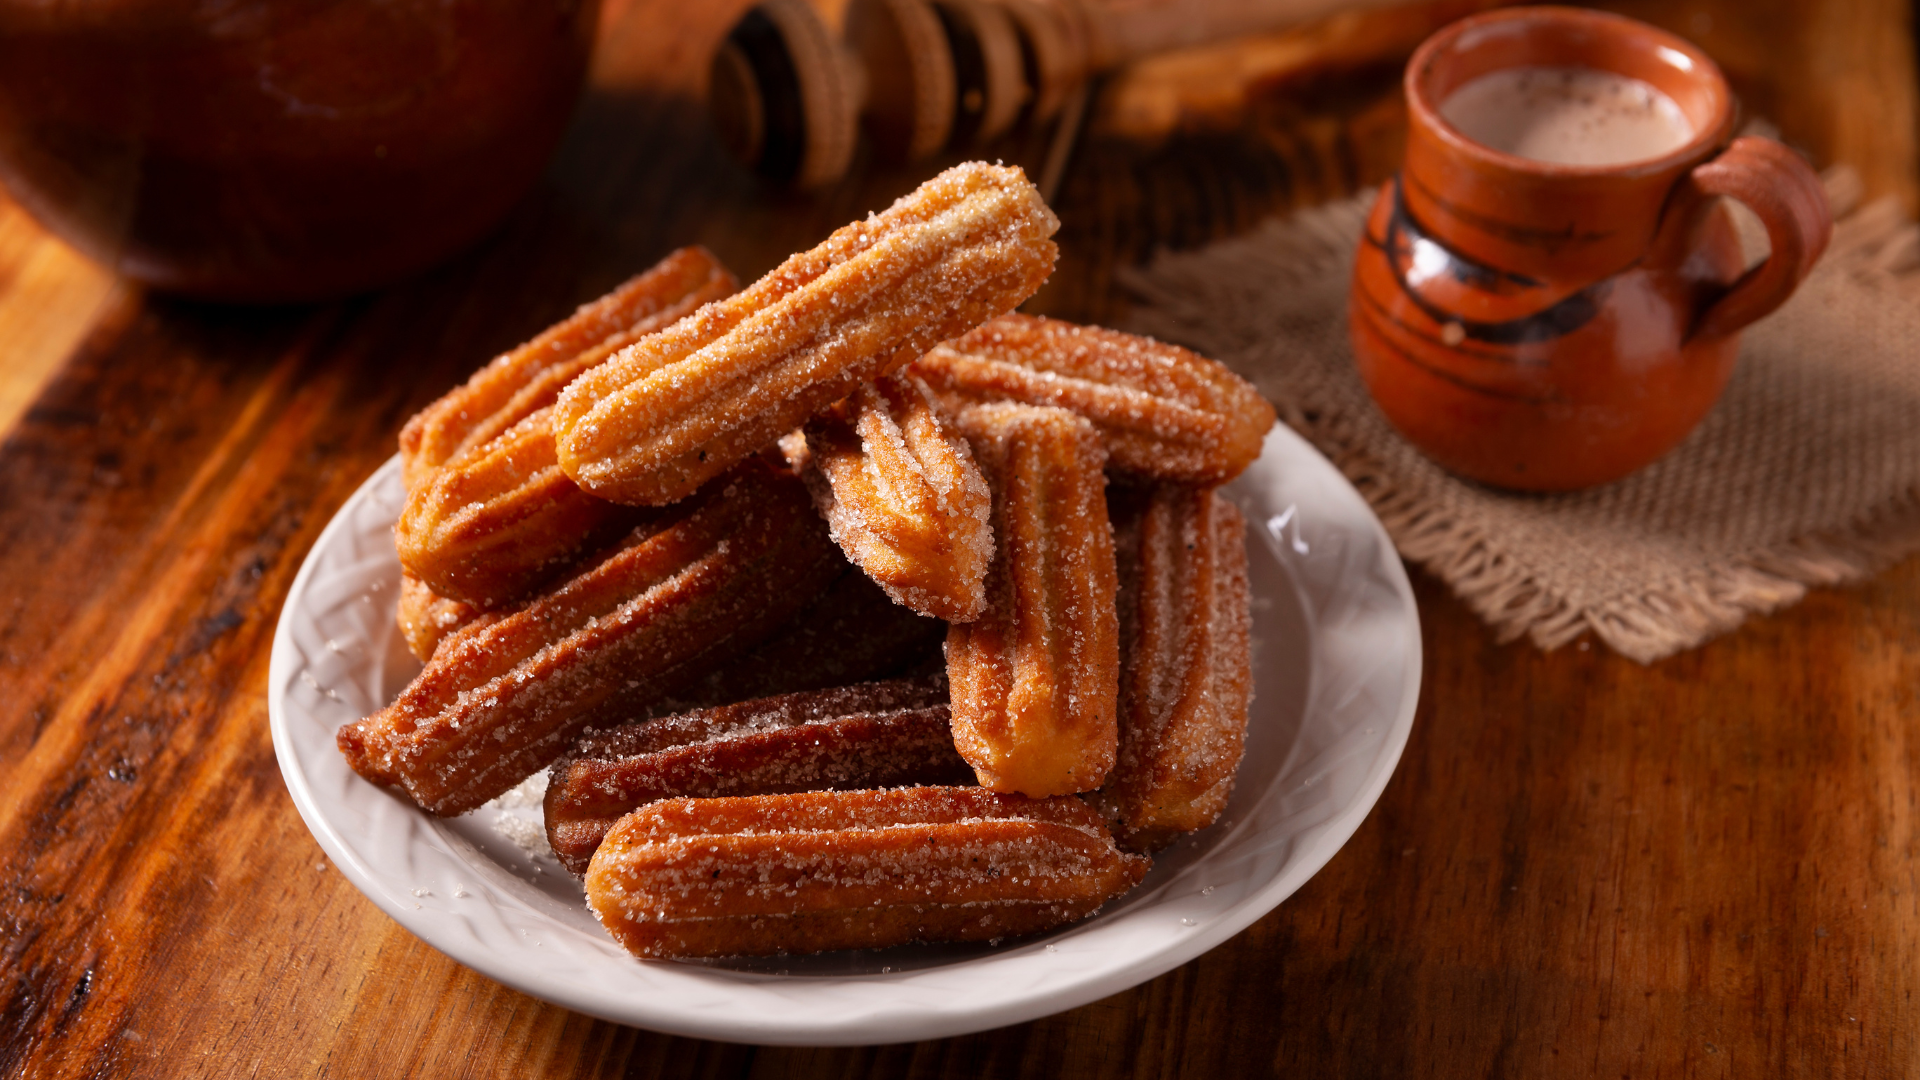 A group of churros on a white plate, dusted in cinnamon sugar.